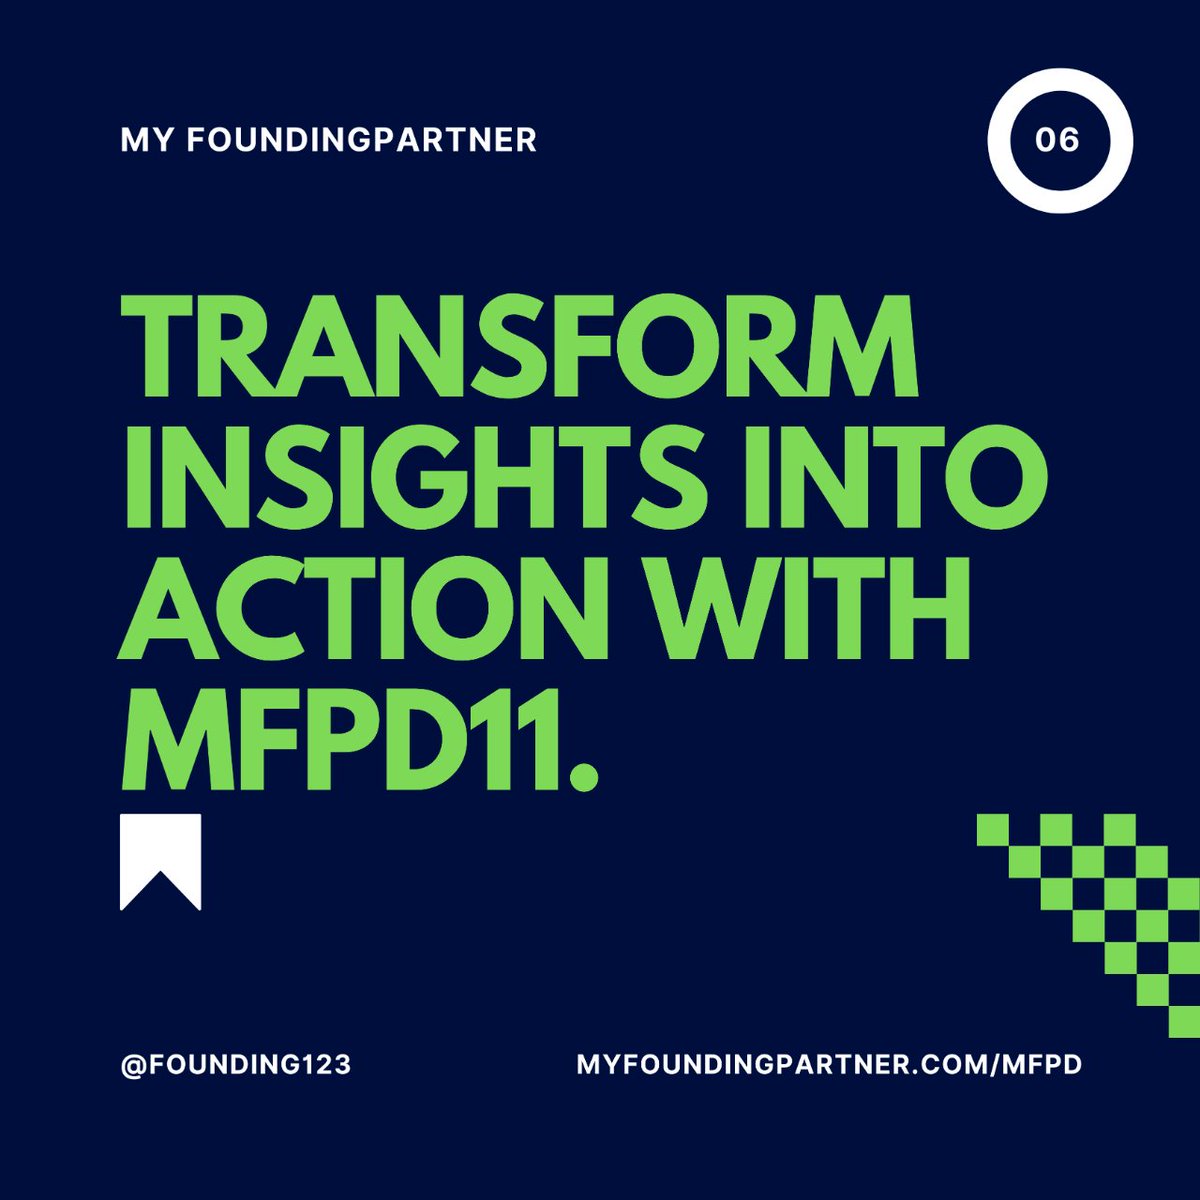 Turn Data into Your Edge with MFP12!

Navigate data with MFP12, from analytics to actionable growth strategies. Swipe for insights! 📊

#BusinessAnalytics #DataDriven #MFP12Analytics #ProfitInsights #MFP #BeAFounder